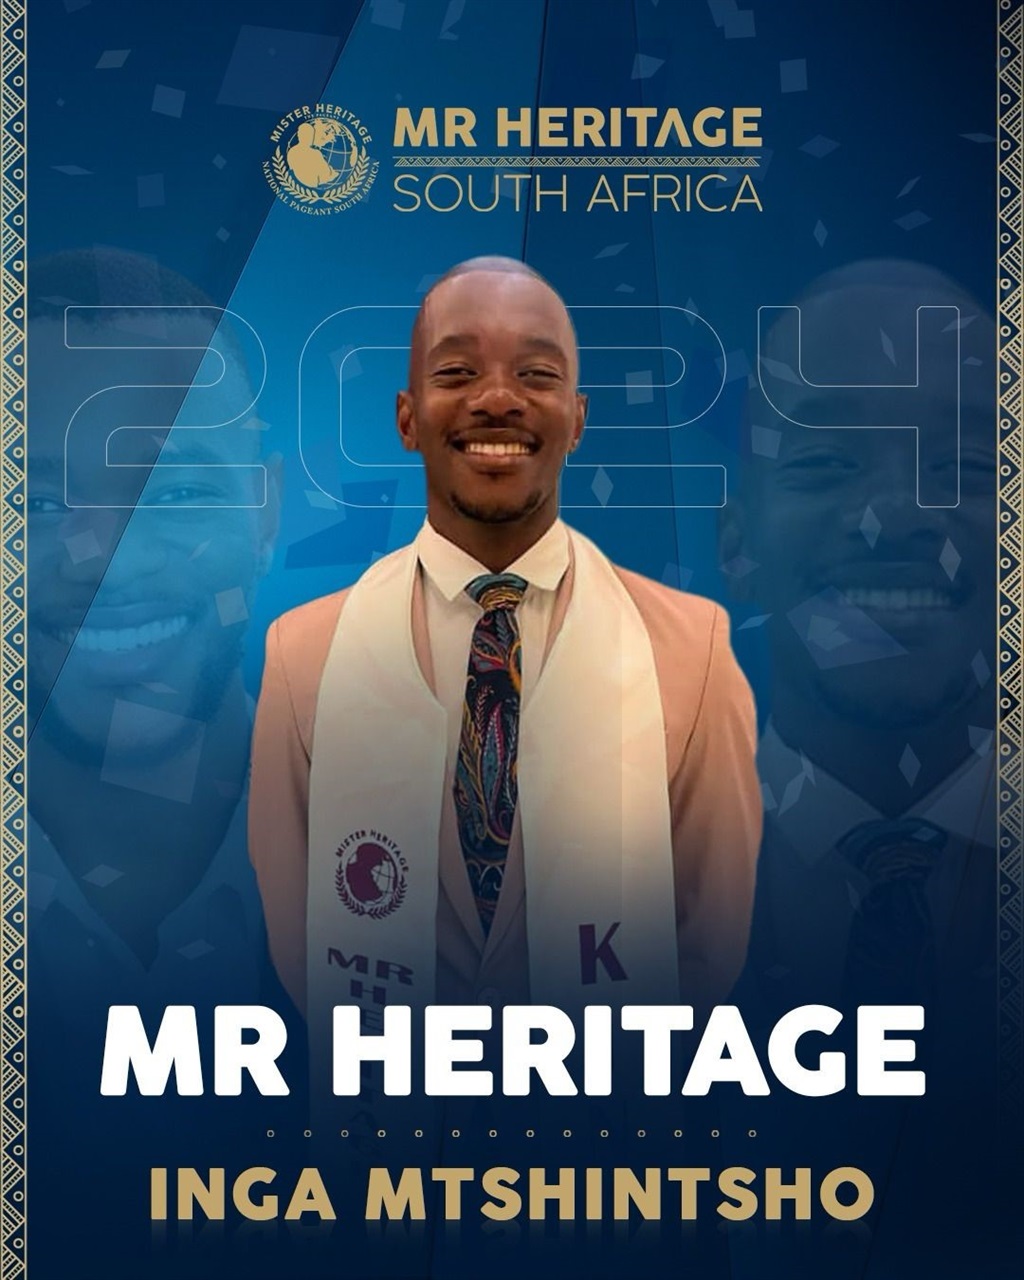 Inga Mtshintsho's life will never be the same again as he is set to represent his home country in Mr Heritage International next month.